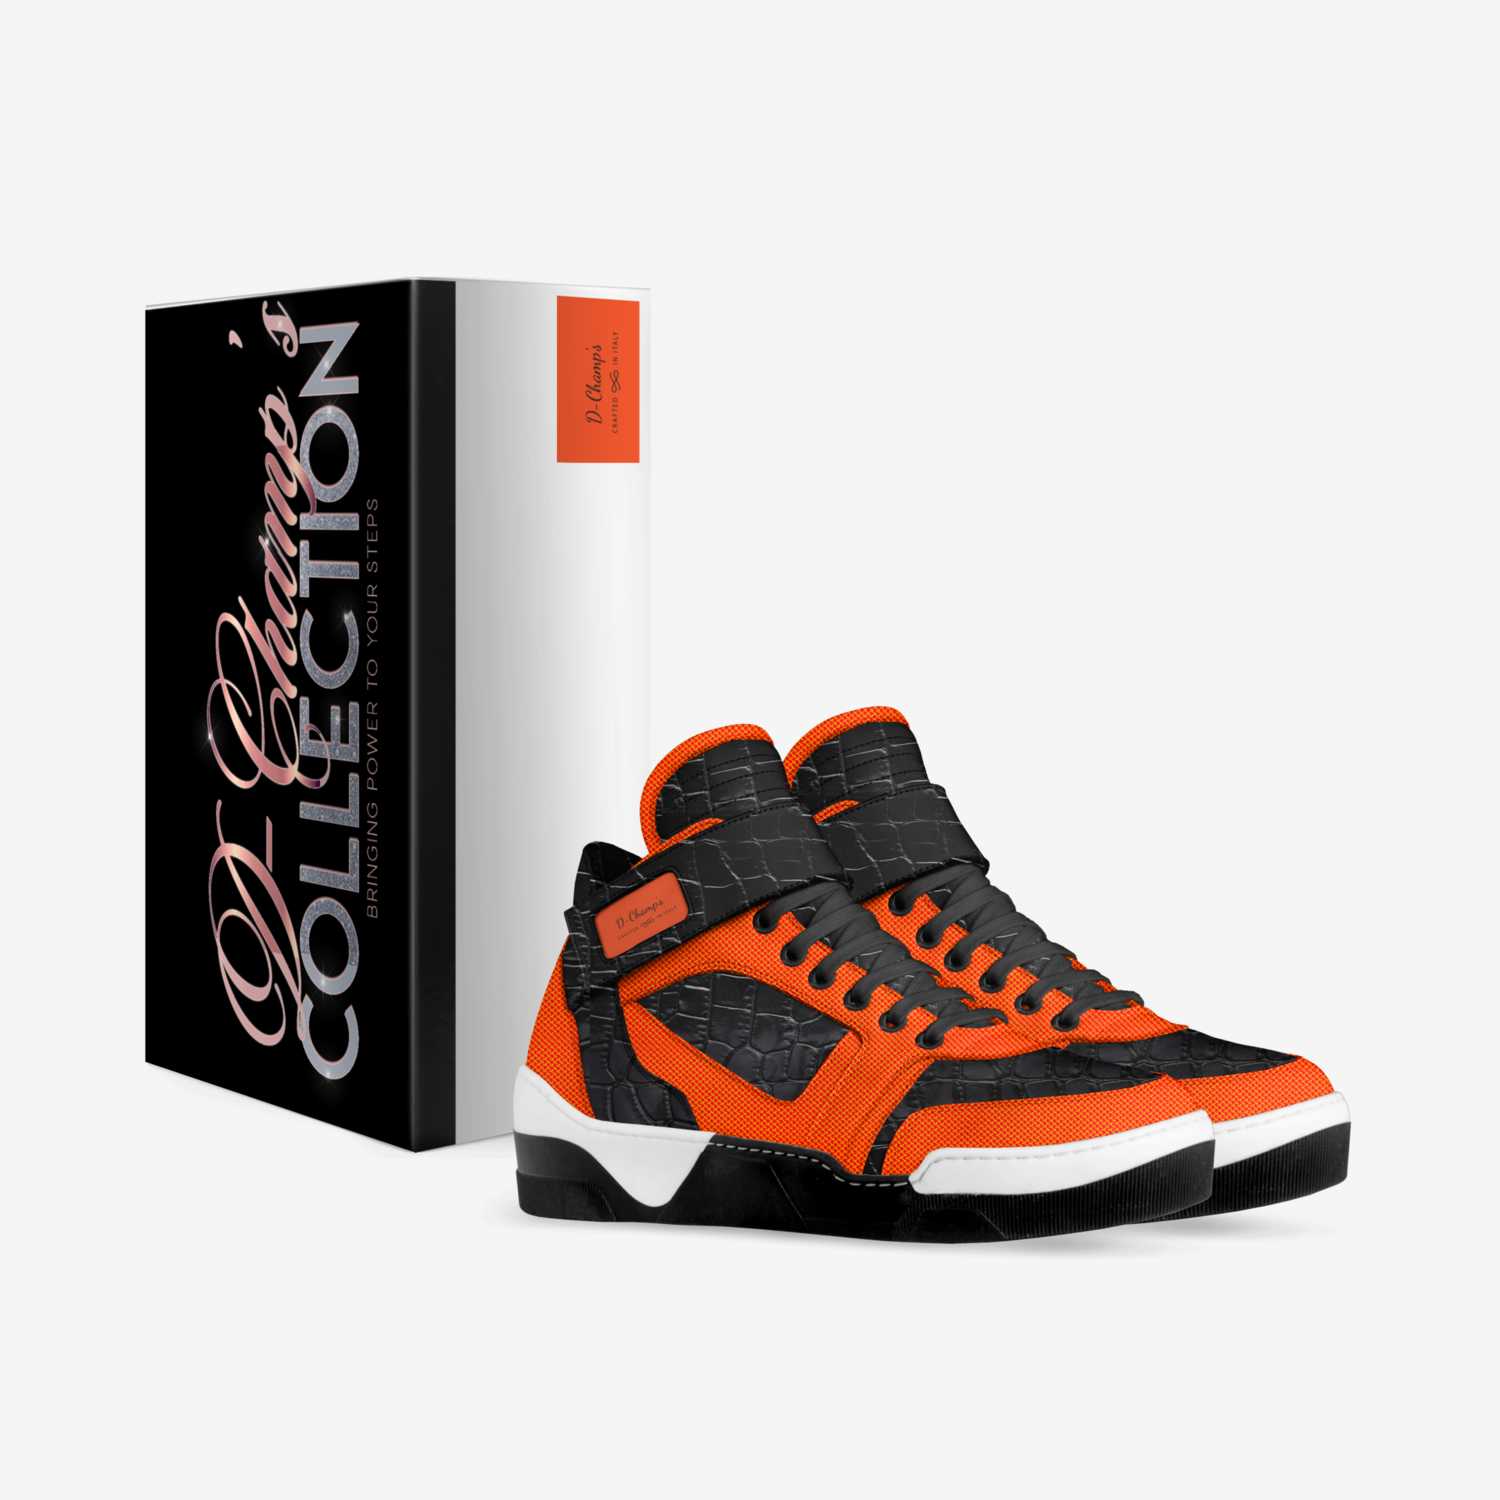 D-Champ's  custom made in Italy shoes by De-borah Champion | Box view